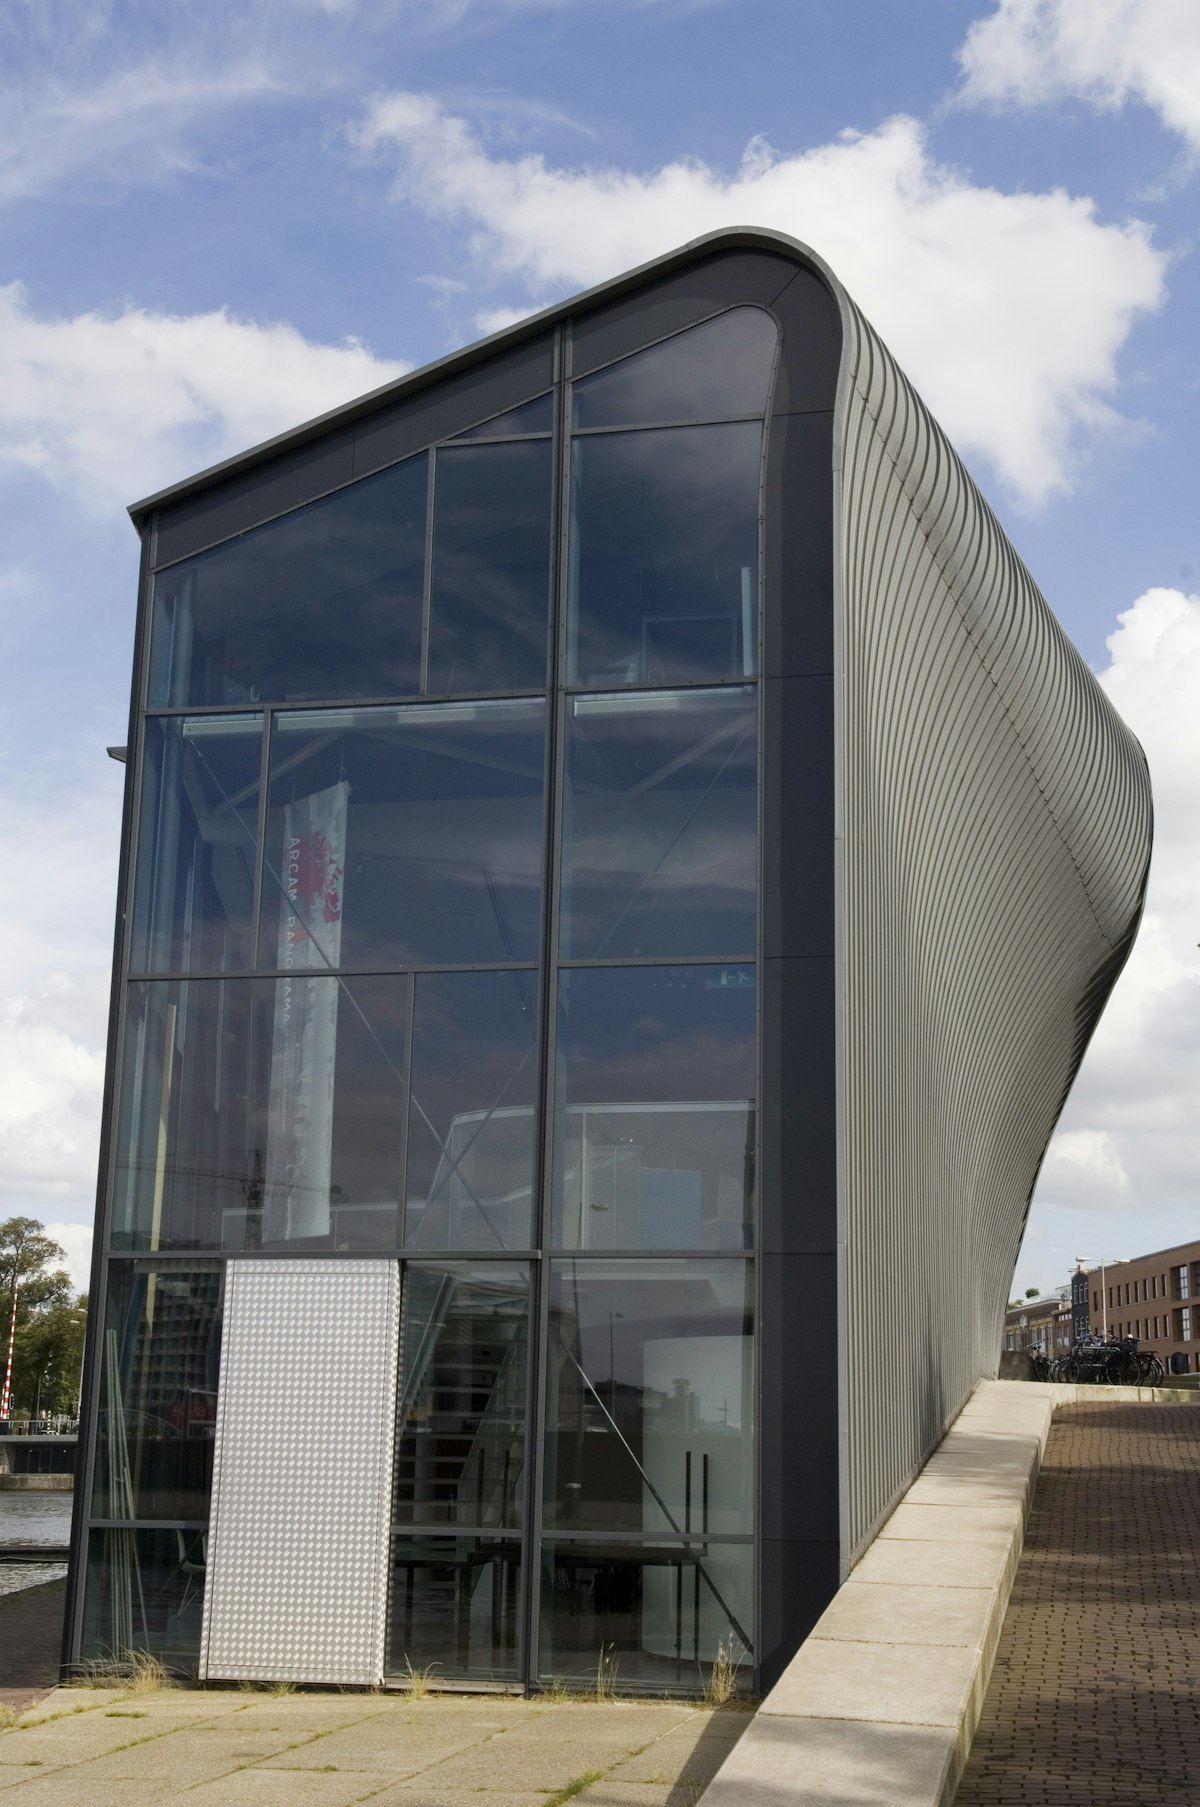 ARCAM Architecture Centre in the Eastern Islands area.